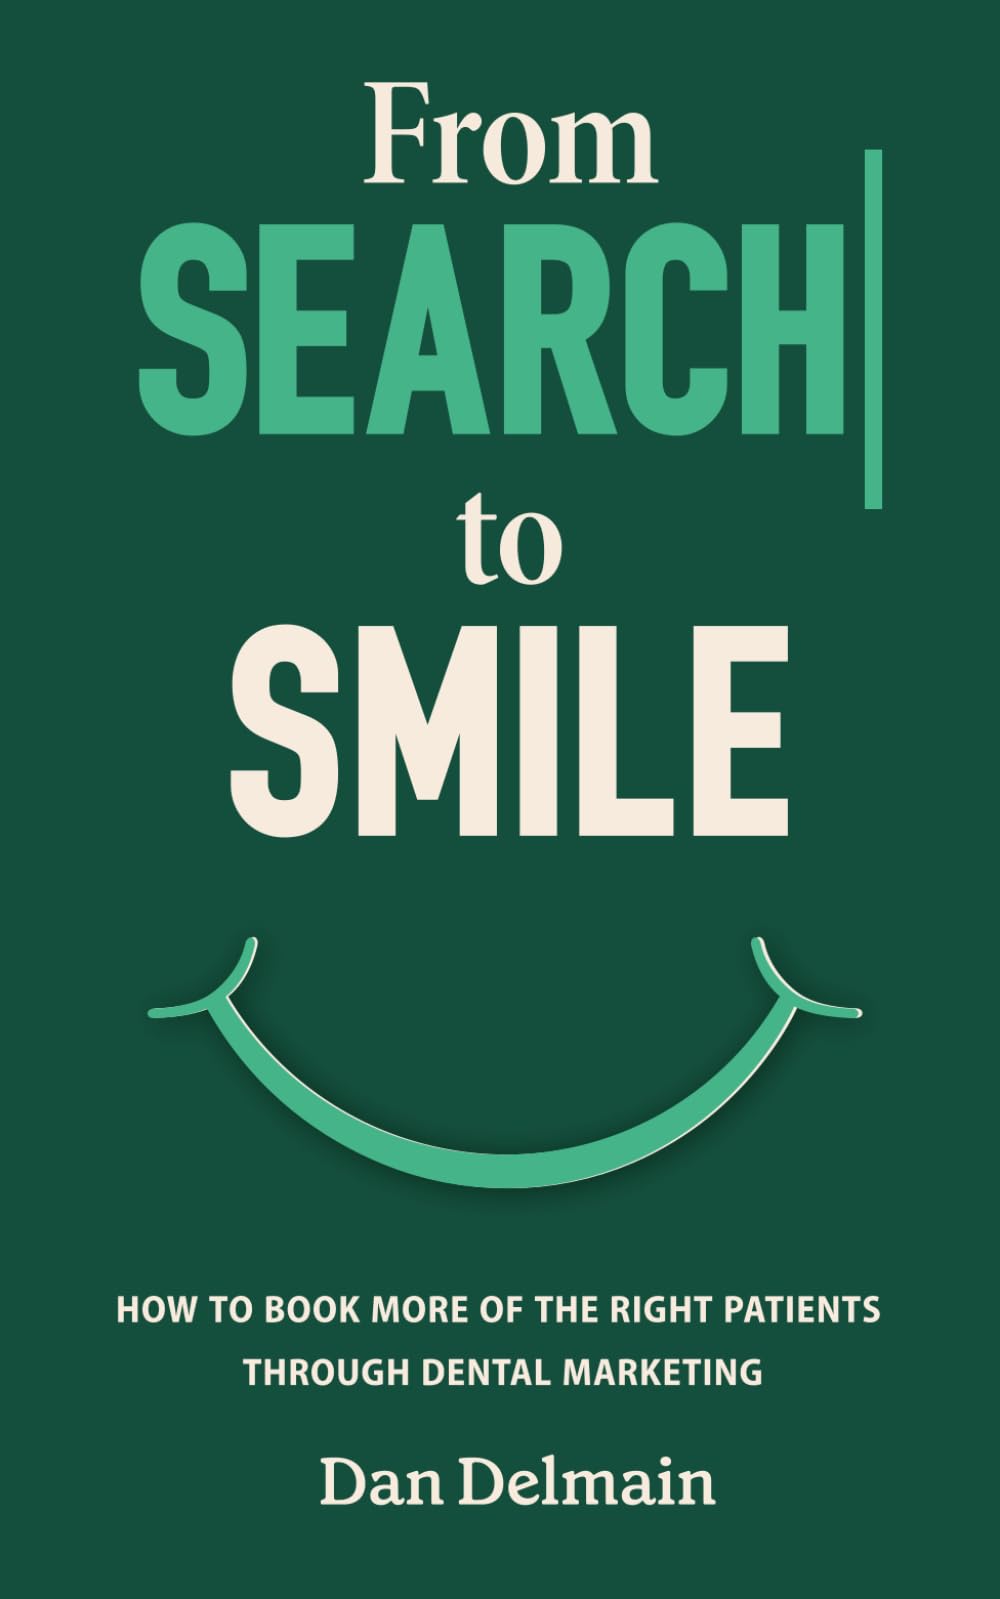 From Search to Smile: How to Book More of the Right Patients Through Dental Marketing